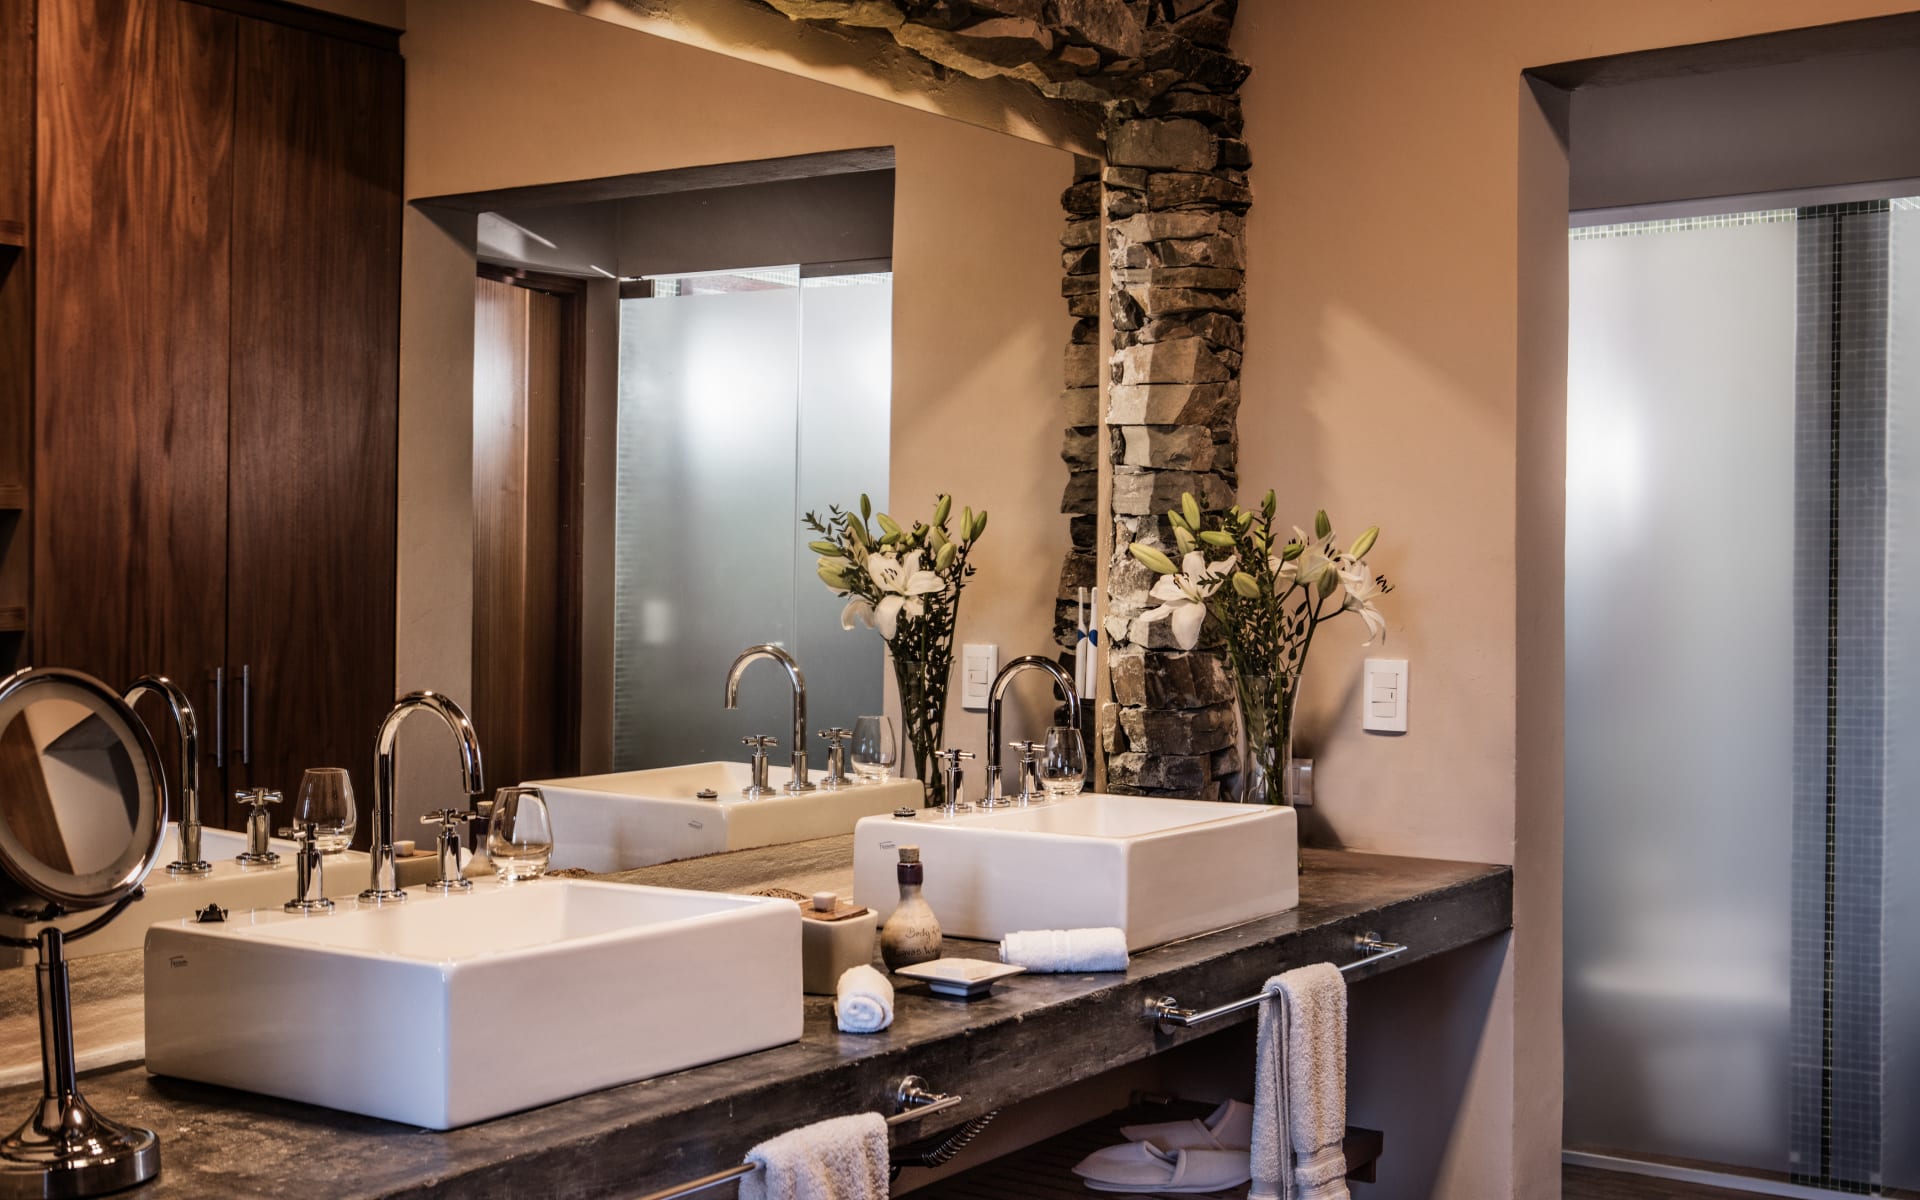 The bathrooms at Canvas Wine Lodge have dual sinks, surrounded by a large mirror and flowers.